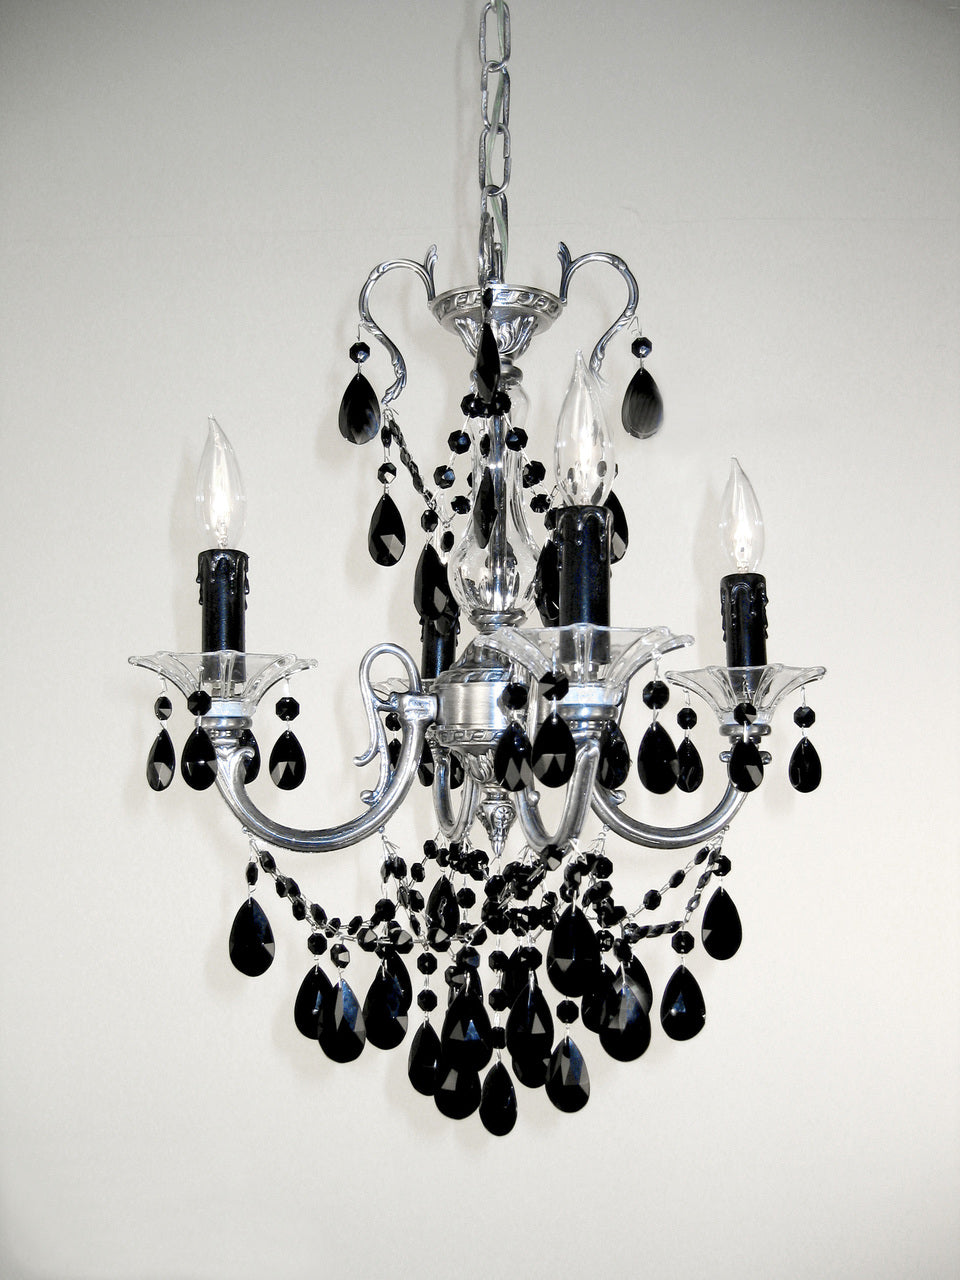 Classic Lighting 57004 MS CBK Via Venteo Crystal Mini Chandelier in Millennium Silver (Imported from Spain)